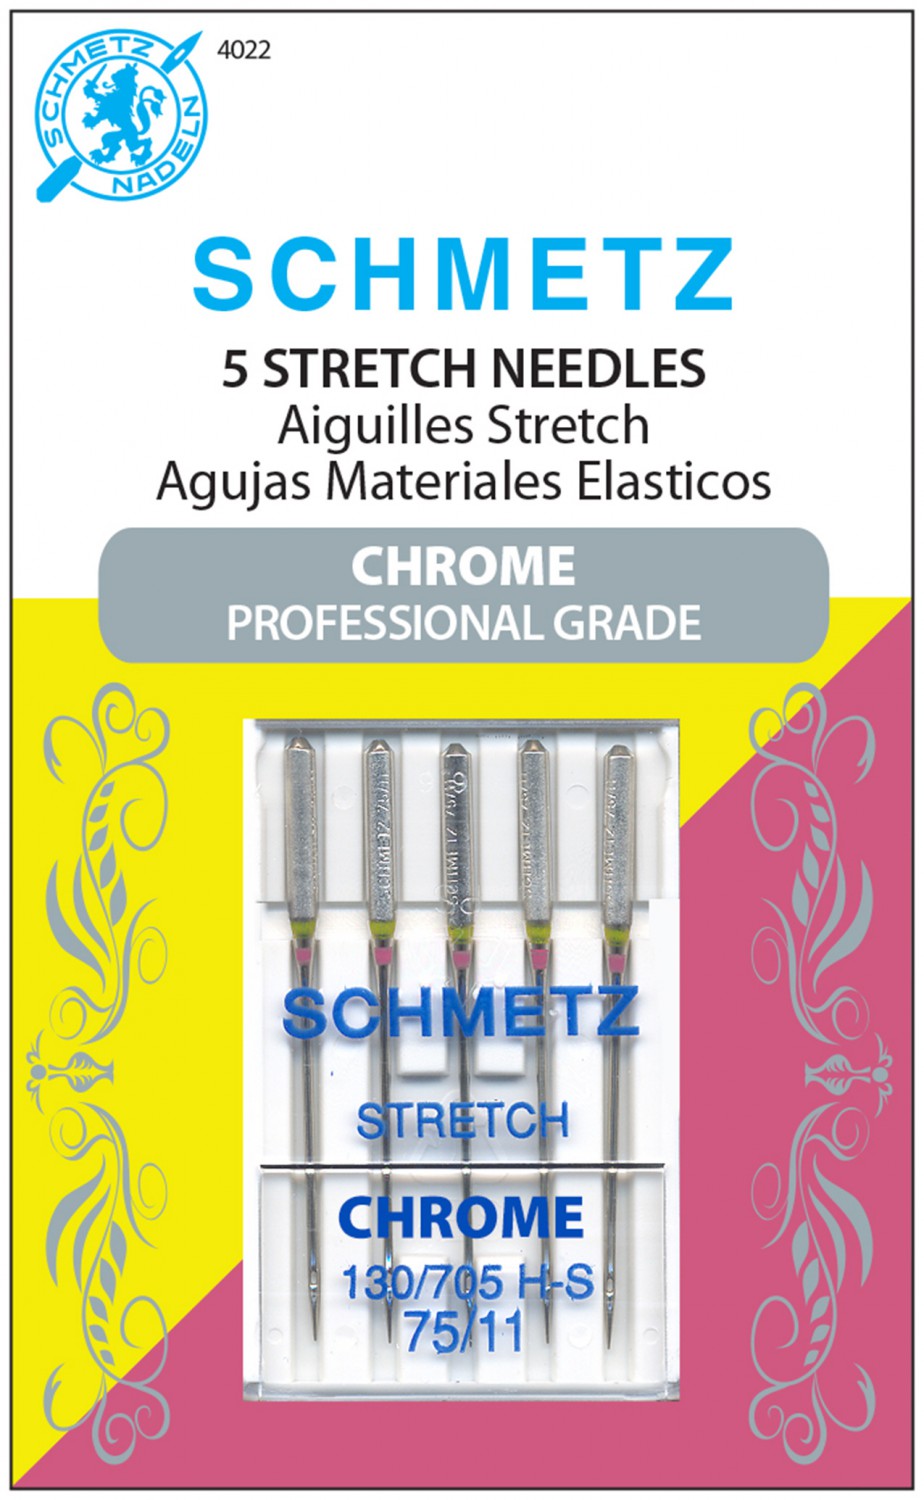 Schmetz Chrome Professional Grade Stretch Needles Carded - 75/11 - 5 count